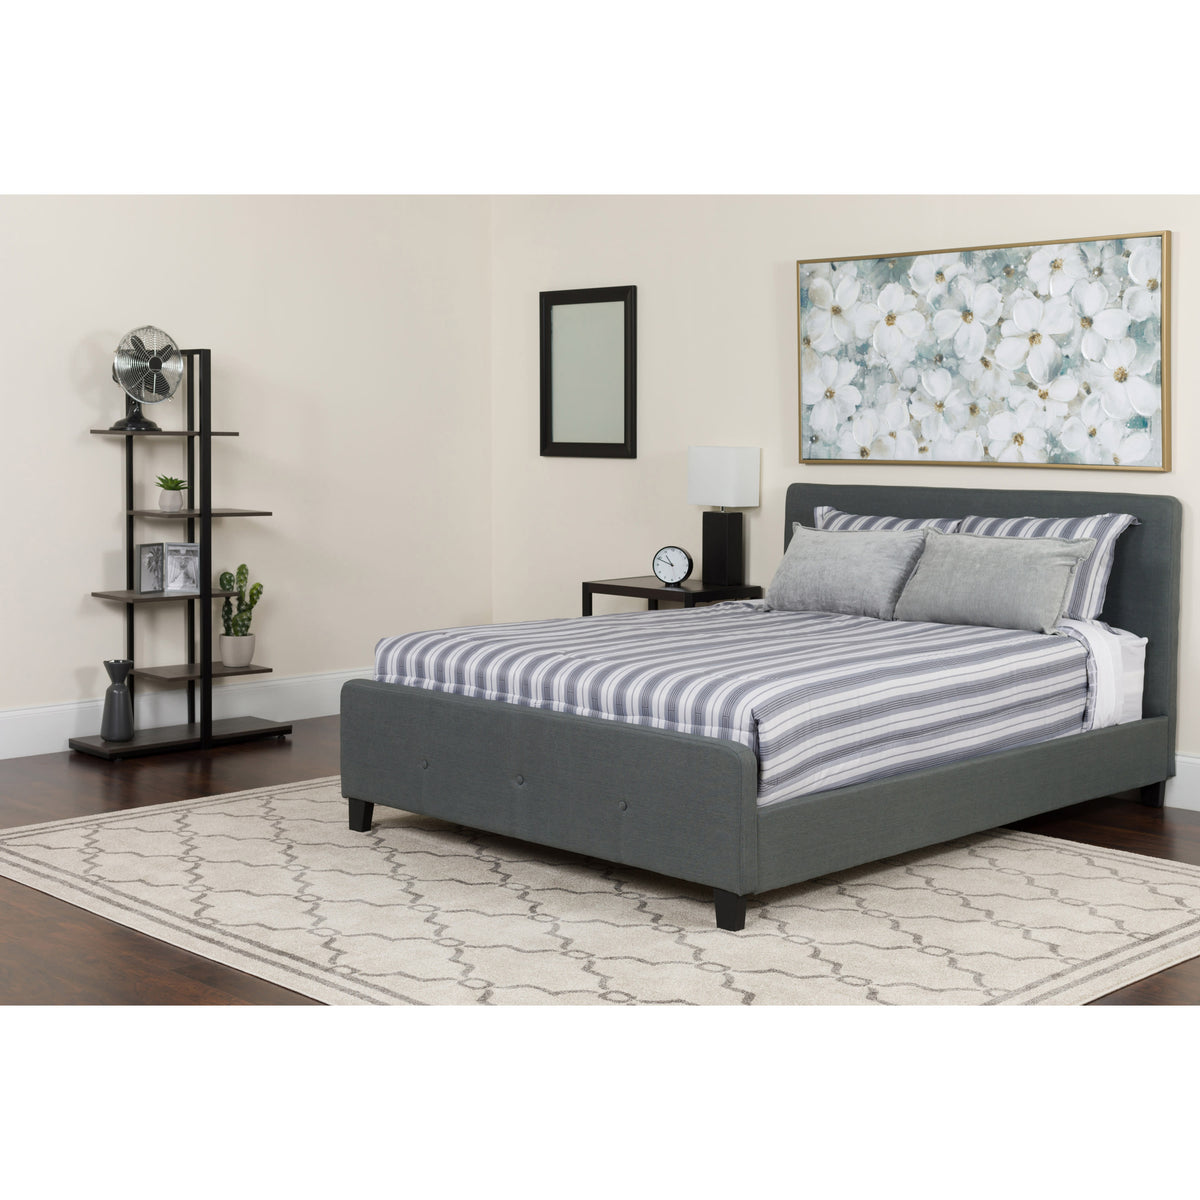 Dark Gray,Full |#| Full Size Button Tufted Upholstered Platform Bed in Dk Gray Fabric w/ Mattress